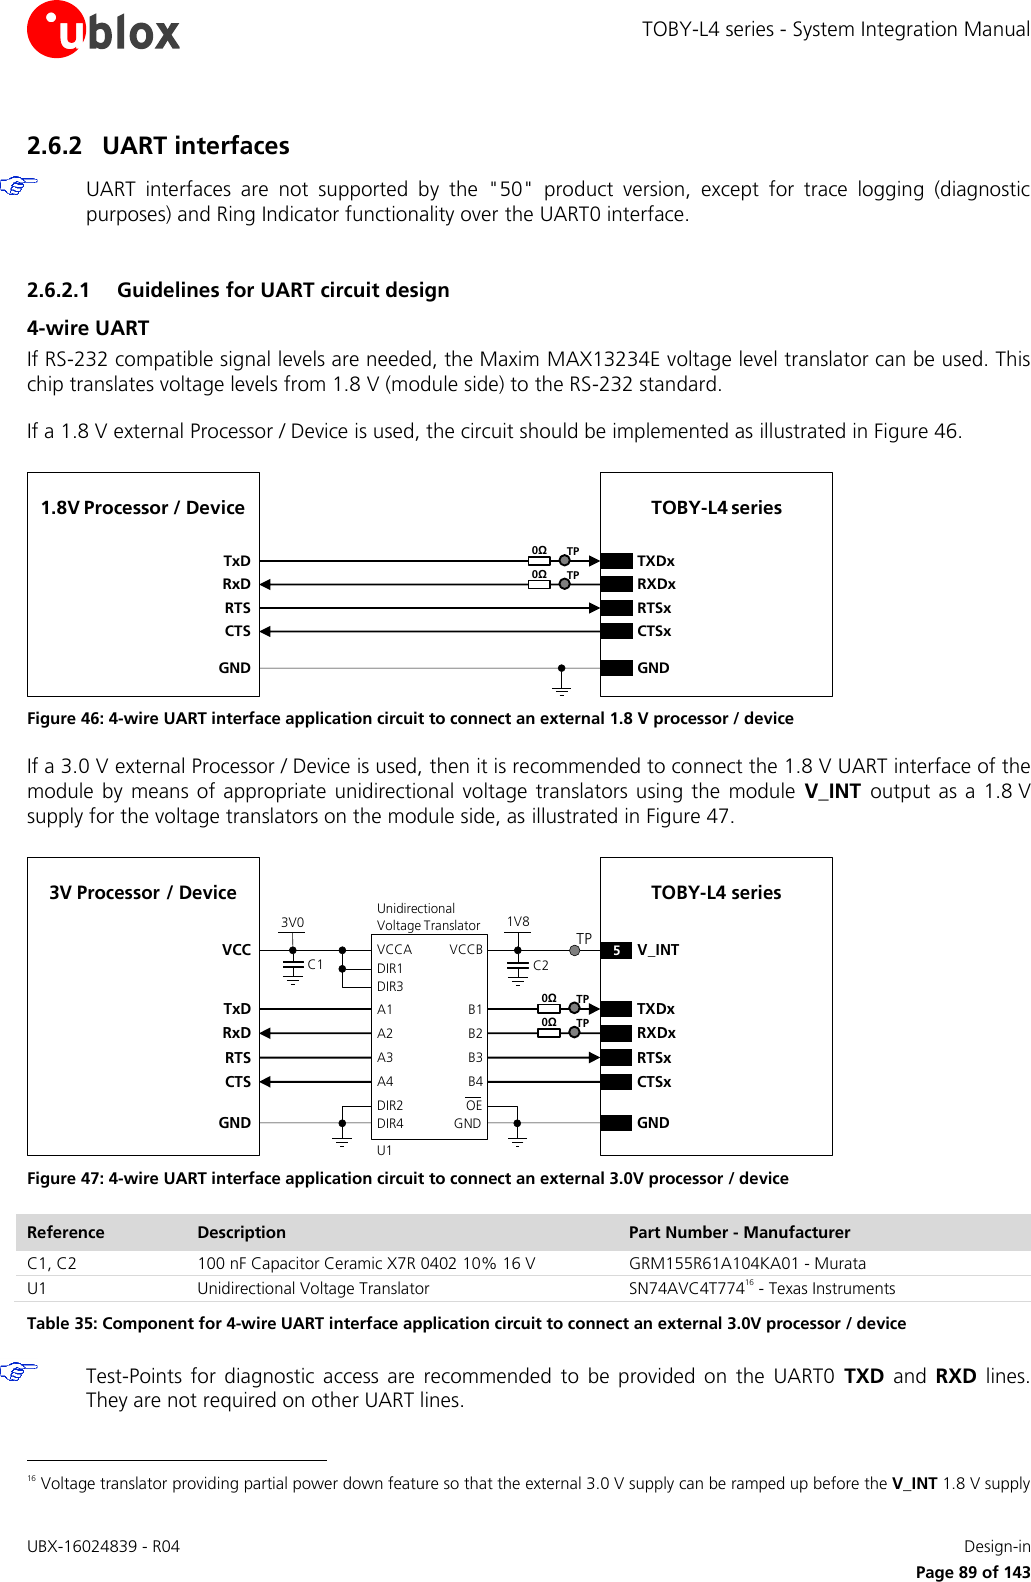 TOBY-L4 series - System Integration Manual UBX-16024839 - R04    Design-in     Page 89 of 143 2.6.2 UART interfaces  UART  interfaces  are  not  supported  by  the  &quot;50&quot;  product  version,  except  for  trace  logging  (diagnostic purposes) and Ring Indicator functionality over the UART0 interface.  2.6.2.1 Guidelines for UART circuit design 4-wire UART If RS-232 compatible signal levels are needed, the Maxim MAX13234E voltage level translator can be used. This chip translates voltage levels from 1.8 V (module side) to the RS-232 standard.  If a 1.8 V external Processor / Device is used, the circuit should be implemented as illustrated in Figure 46.  TxD1.8V Processor / DeviceRxDRTSCTSGNDTOBY-L4 series TXDxRXDxRTSxCTSxGND0ΩTP0ΩTP Figure 46: 4-wire UART interface application circuit to connect an external 1.8 V processor / device If a 3.0 V external Processor / Device is used, then it is recommended to connect the 1.8 V UART interface of the module by  means of appropriate unidirectional voltage translators using the  module  V_INT  output as a  1.8 V supply for the voltage translators on the module side, as illustrated in Figure 47.  5V_INTTxD3V Processor / DeviceRxDRTSCTSGNDTOBY-L4 series TXDxRXDxRTSxCTSxGND1V8B1 A1GNDU1B3A3VCCBVCCAUnidirectionalVoltage TranslatorC1 C23V0DIR3DIR2 OEDIR1VCCB2 A2B4A4DIR4TP0ΩTP0ΩTP Figure 47: 4-wire UART interface application circuit to connect an external 3.0V processor / device Reference Description Part Number - Manufacturer C1, C2 100 nF Capacitor Ceramic X7R 0402 10% 16 V GRM155R61A104KA01 - Murata U1 Unidirectional Voltage Translator SN74AVC4T77416 - Texas Instruments Table 35: Component for 4-wire UART interface application circuit to connect an external 3.0V processor / device  Test-Points  for  diagnostic  access  are  recommended  to  be provided  on  the  UART0  TXD  and  RXD  lines. They are not required on other UART lines.                                                       16 Voltage translator providing partial power down feature so that the external 3.0 V supply can be ramped up before the V_INT 1.8 V supply 